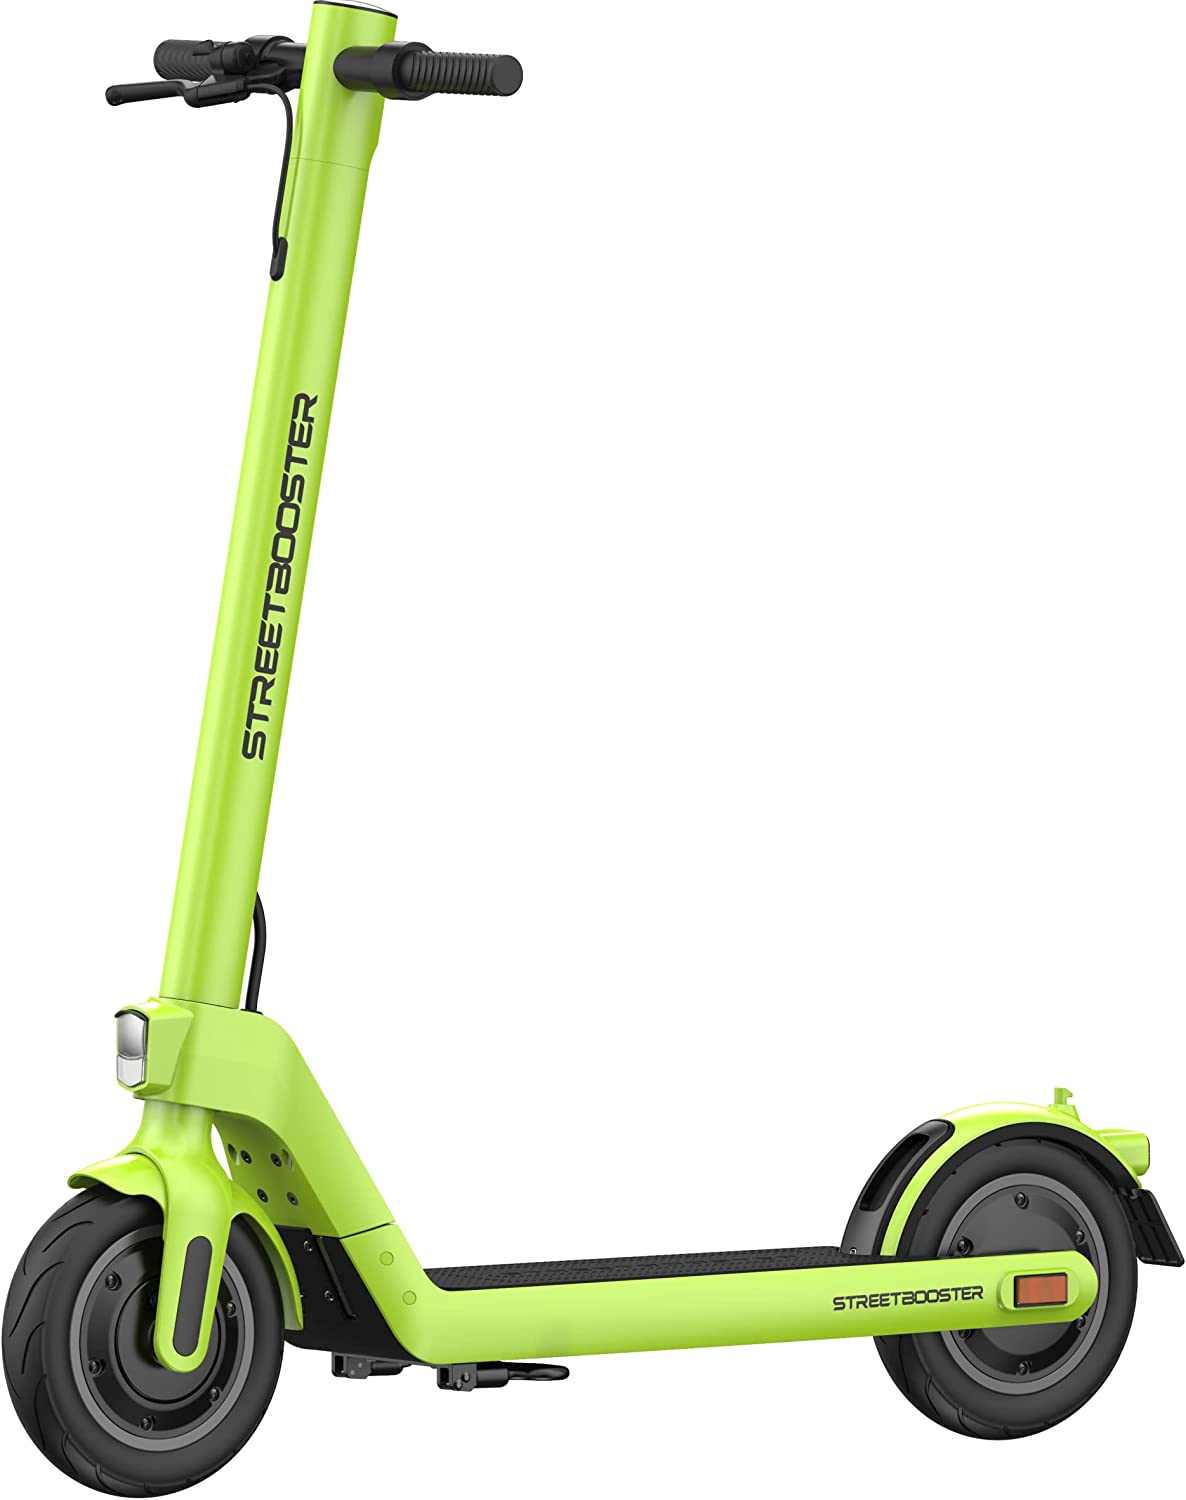 E-Scooter "Streetbooster Two" von STREETBOOSTER GmbH